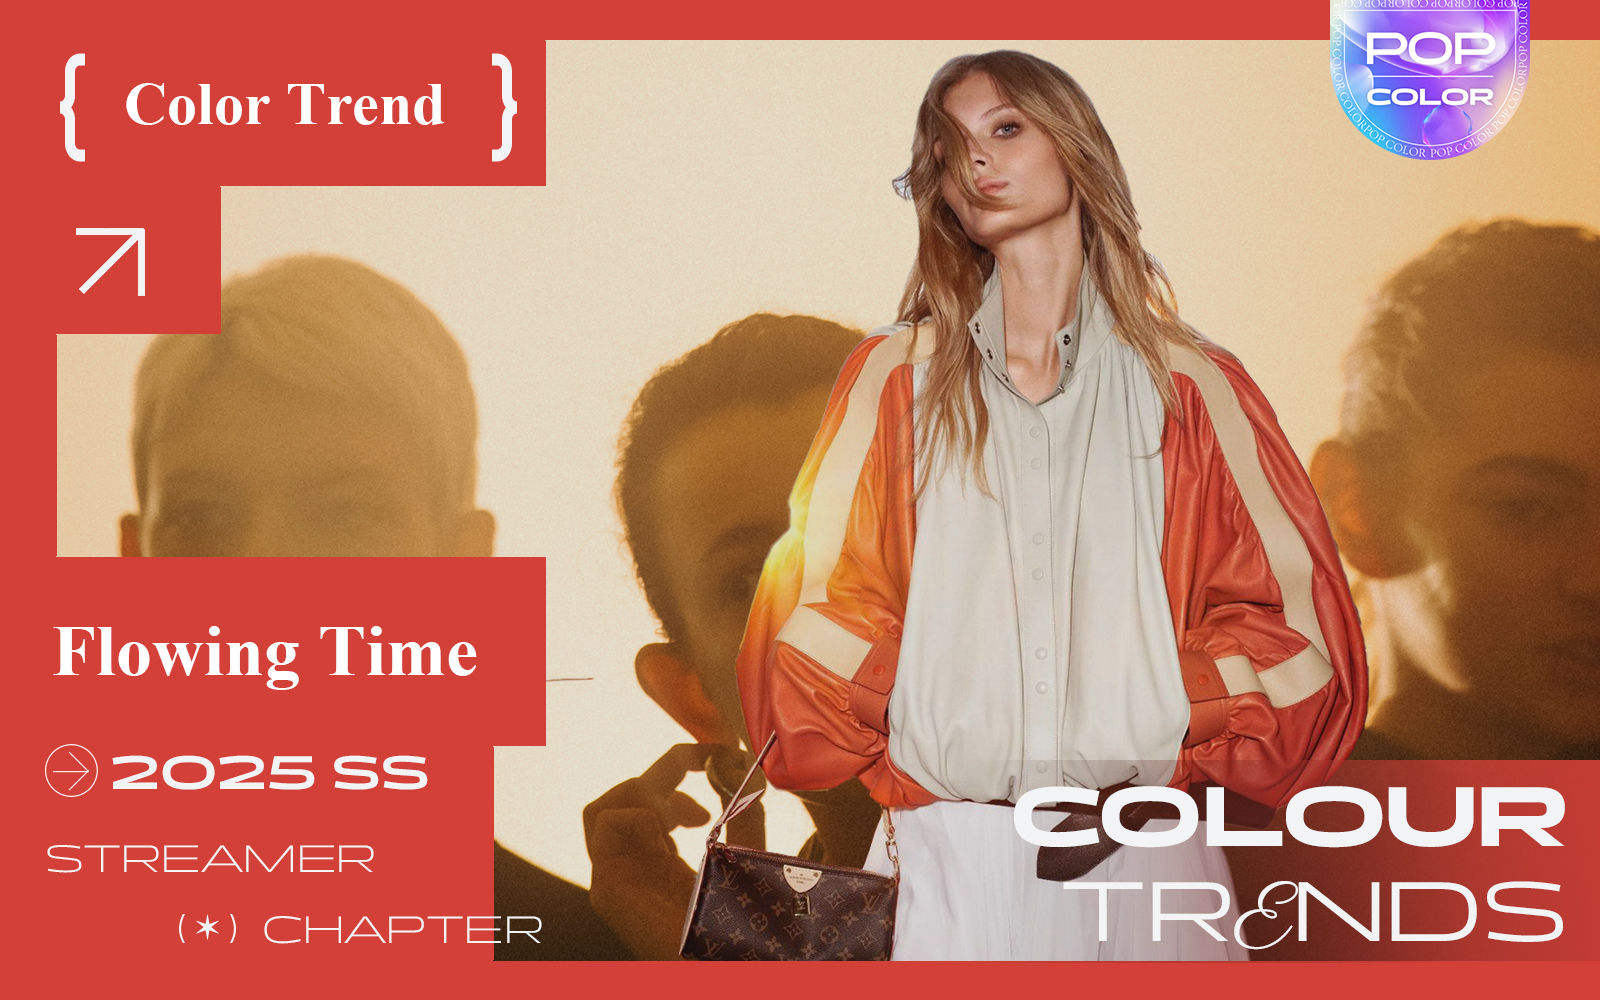 Flowing Time -- S/S 2025 Color Trend for Womenswear